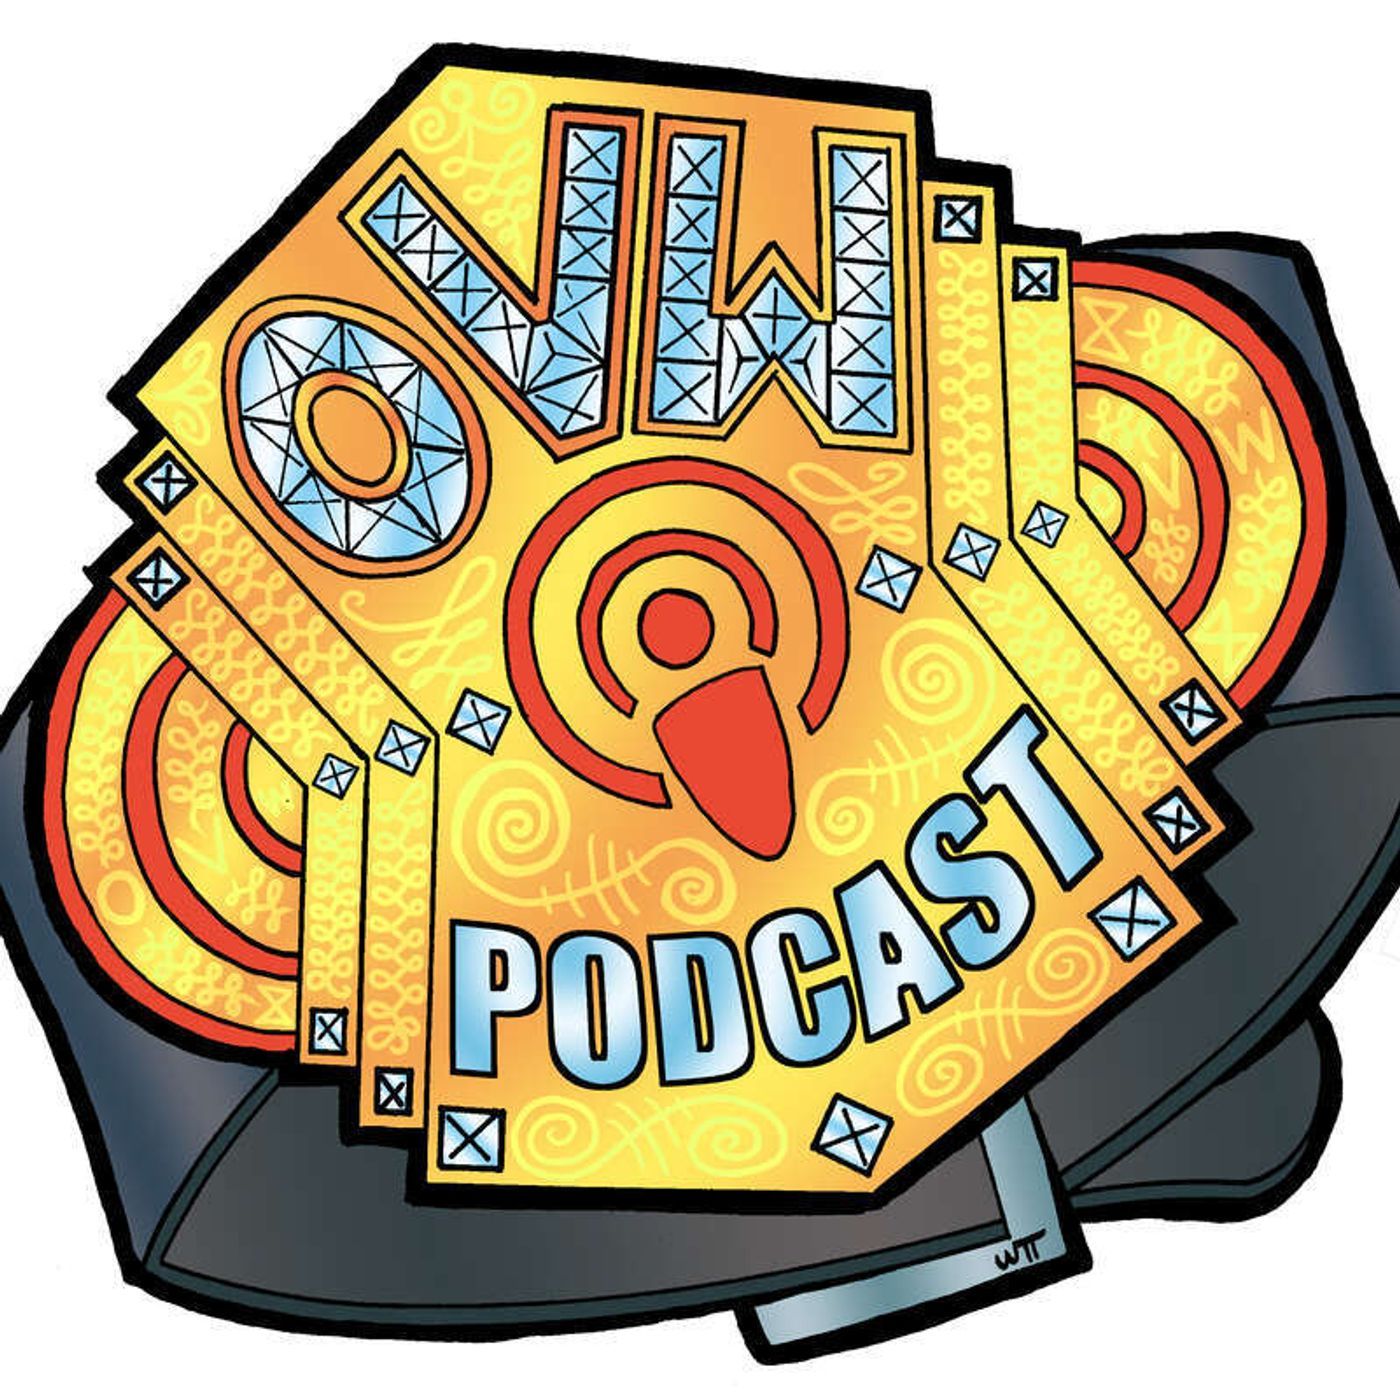 Introducing:“Podcasters: The unofficial Wrestlers aftershow from the OVW Podcast, the unofficial podcast of Ohio Valley Wrestling.”